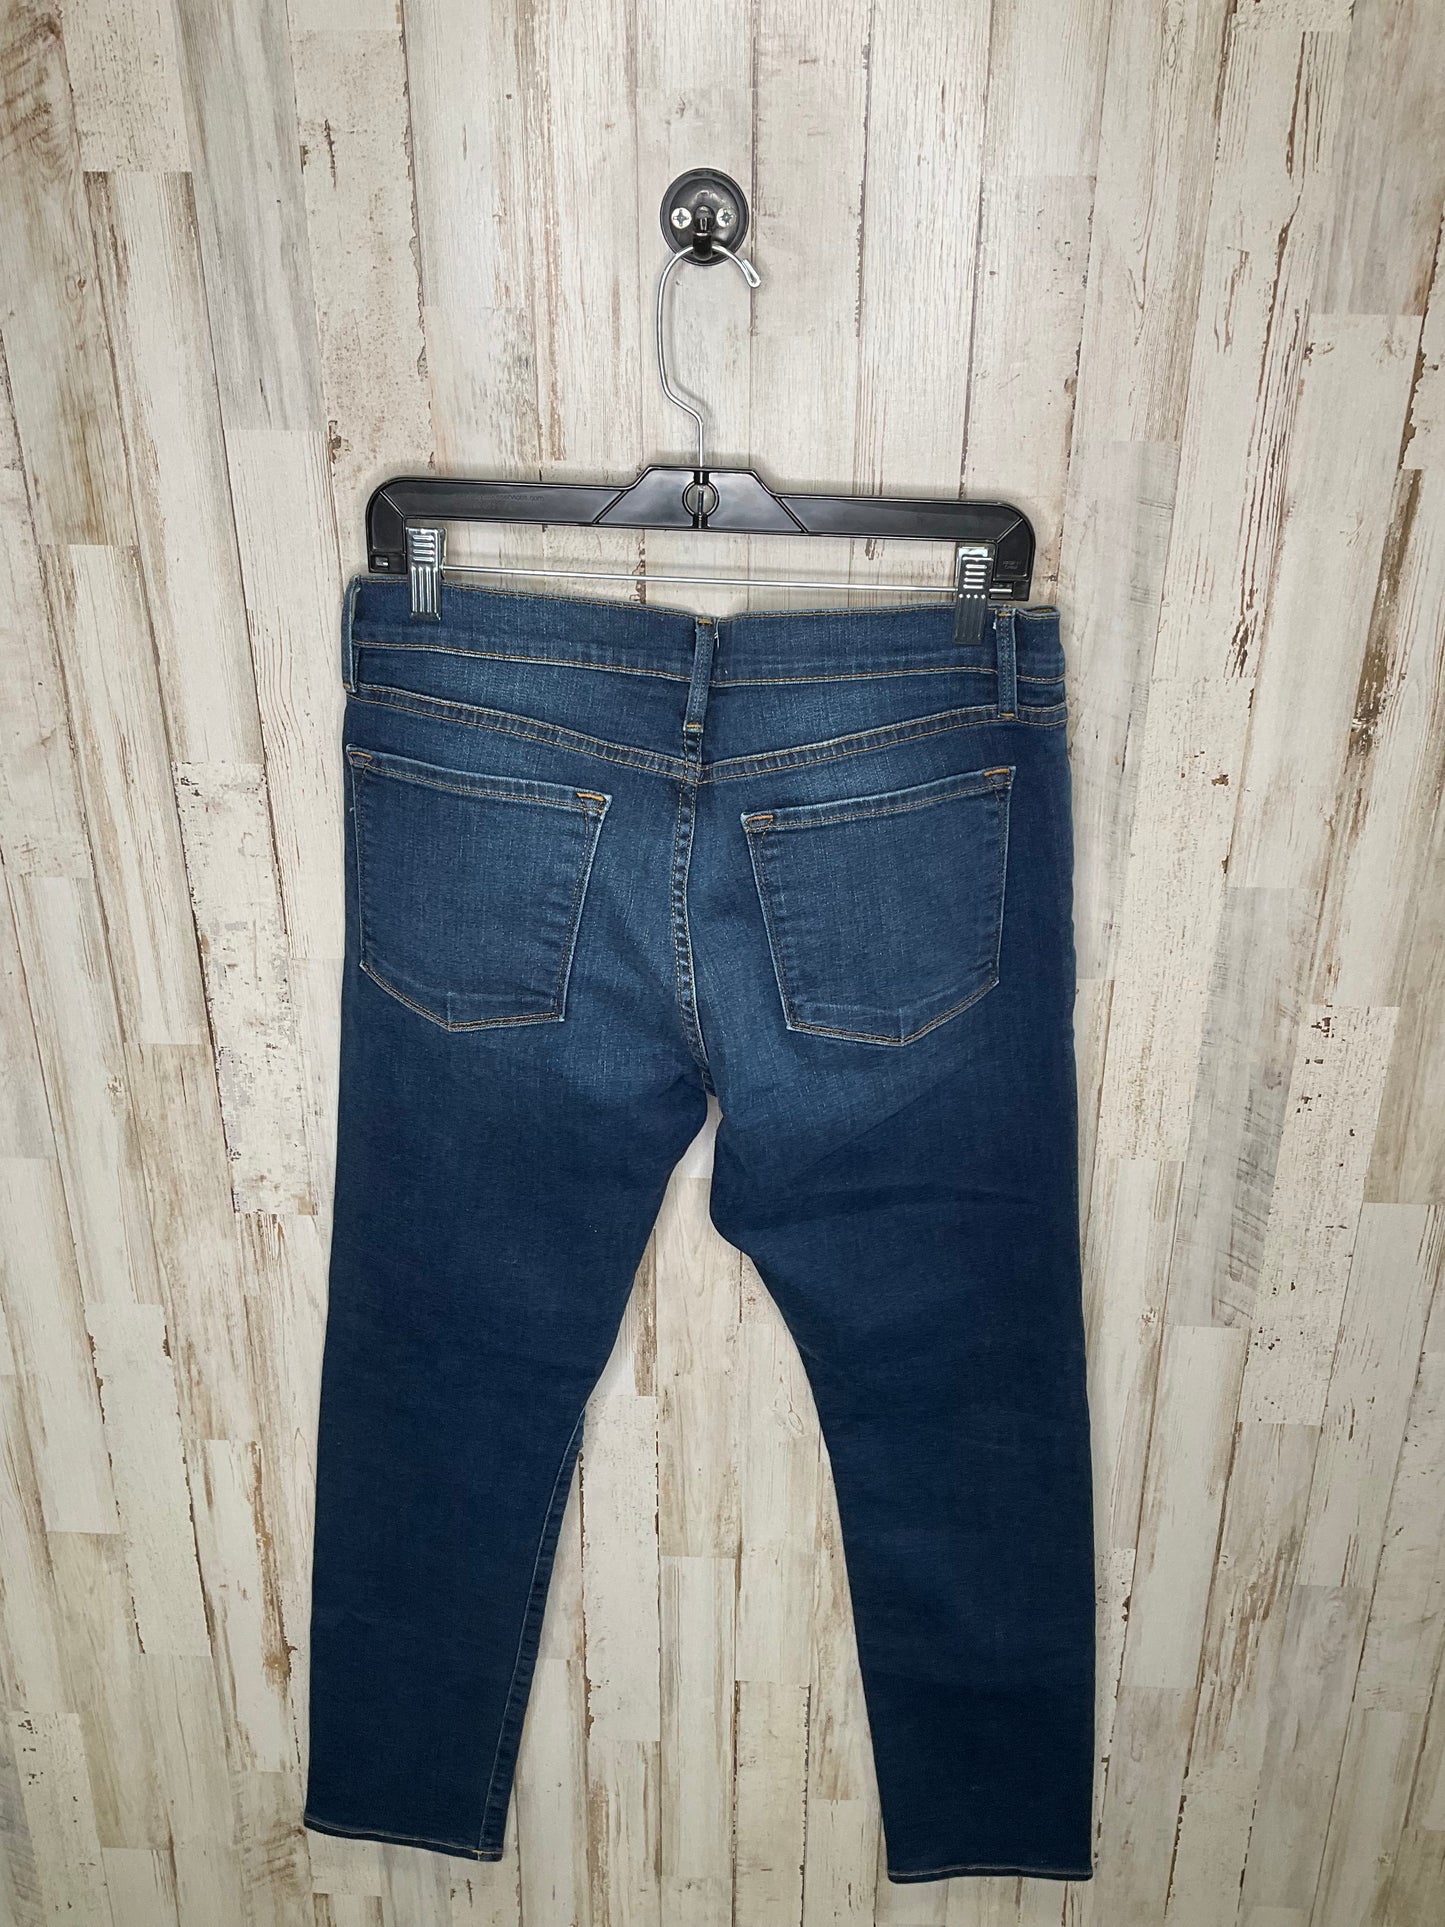 Jeans Straight By Frame  Size: 10